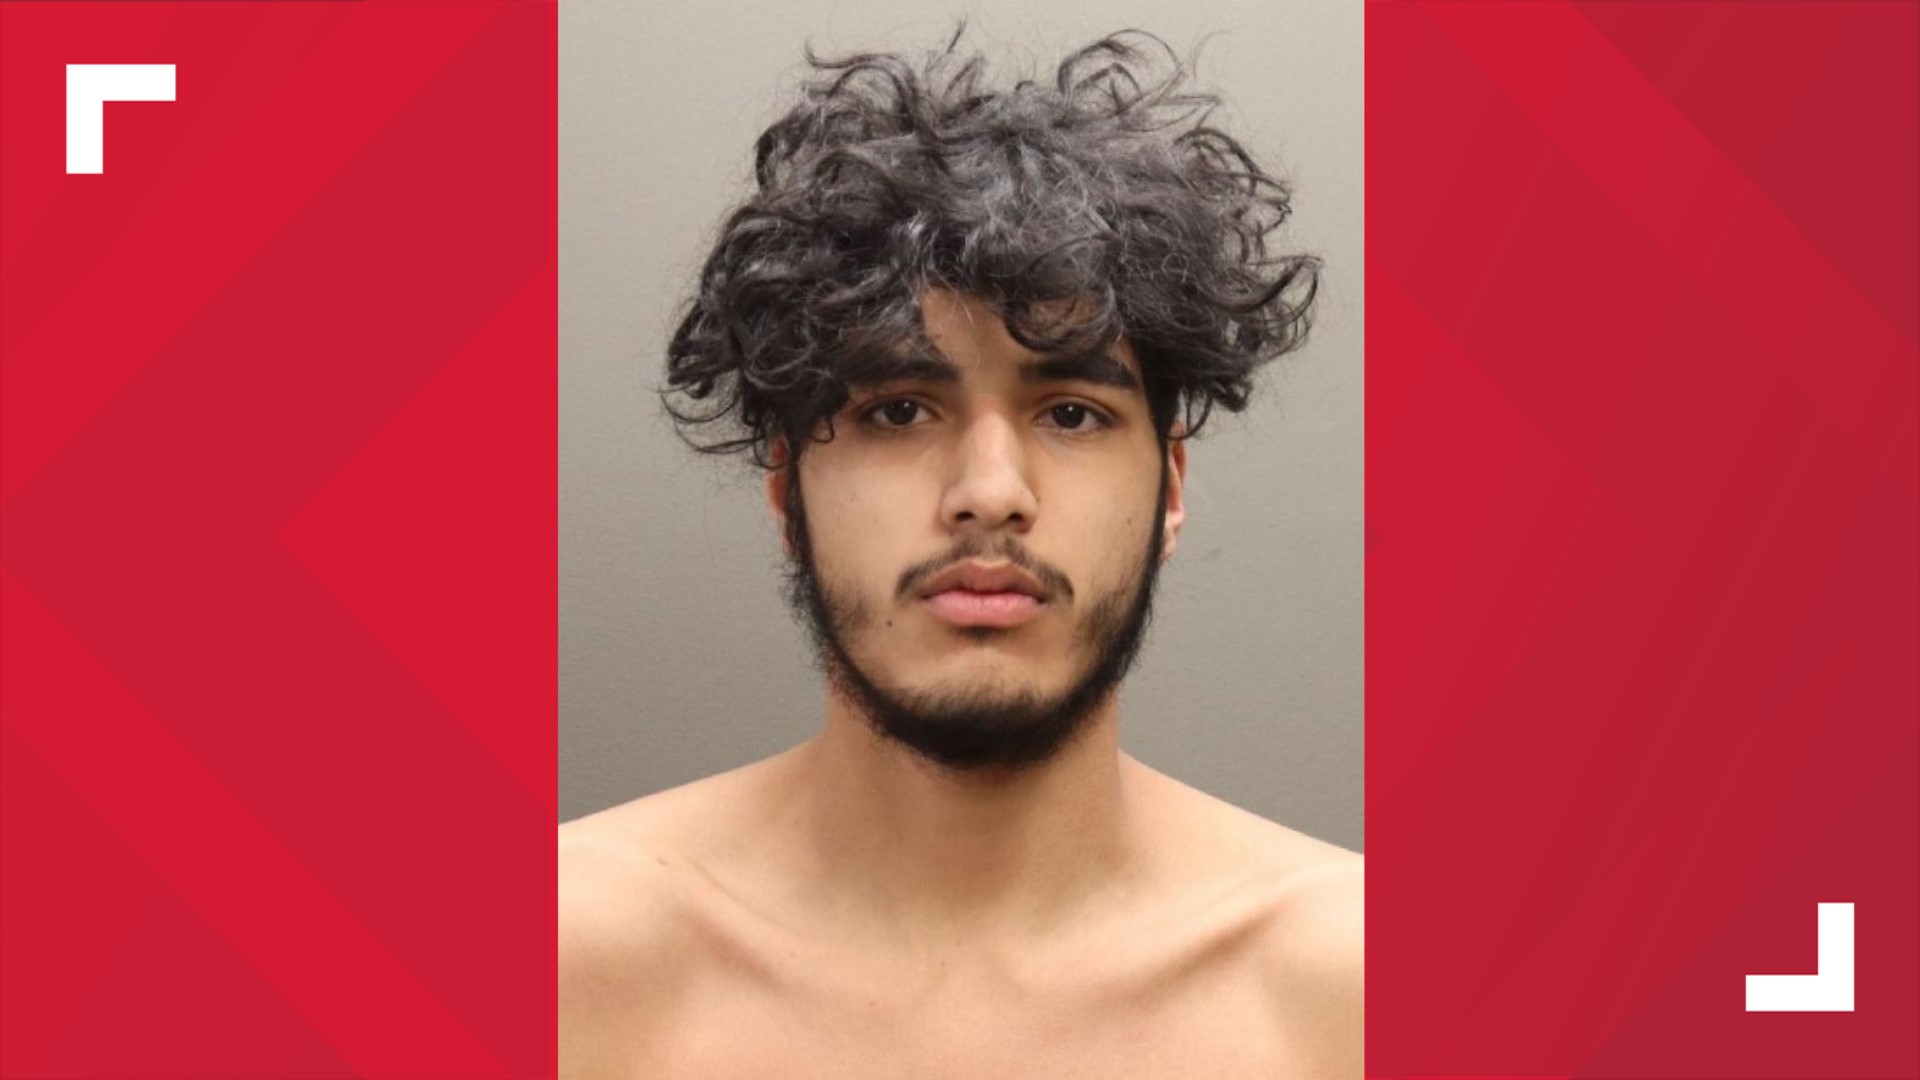 Jesus Castro is charged with murder in the death of 18-year-old Marshawn Davis on February 18.